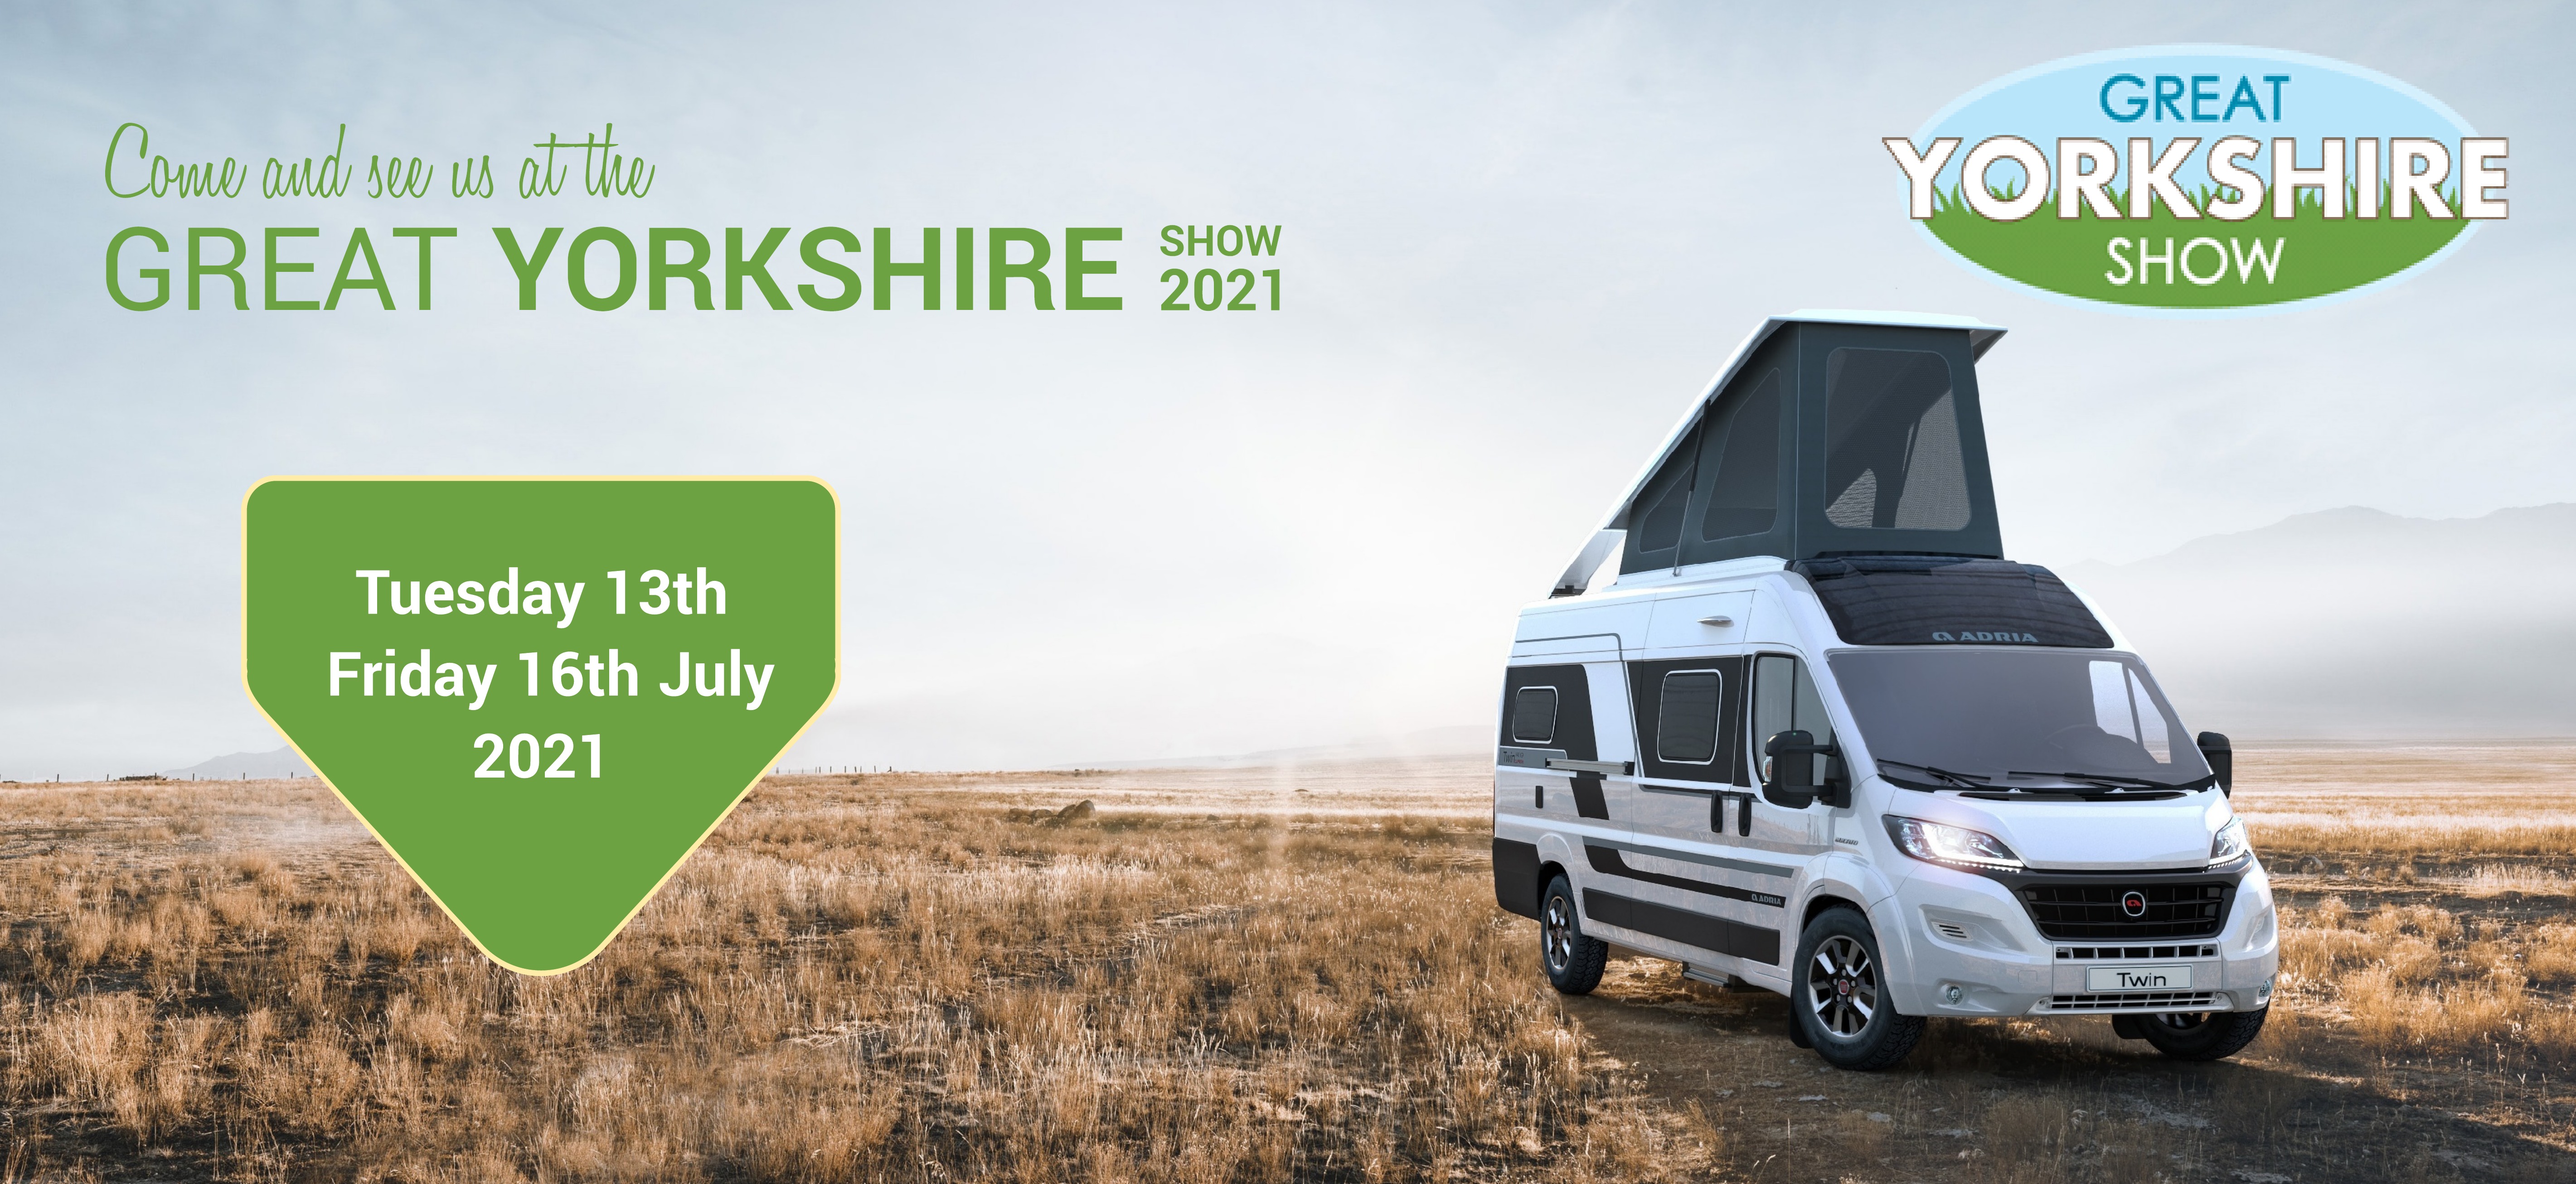 Join us at the Great Yorkshire Show 2021 on the 13th-16th July. - Block Image